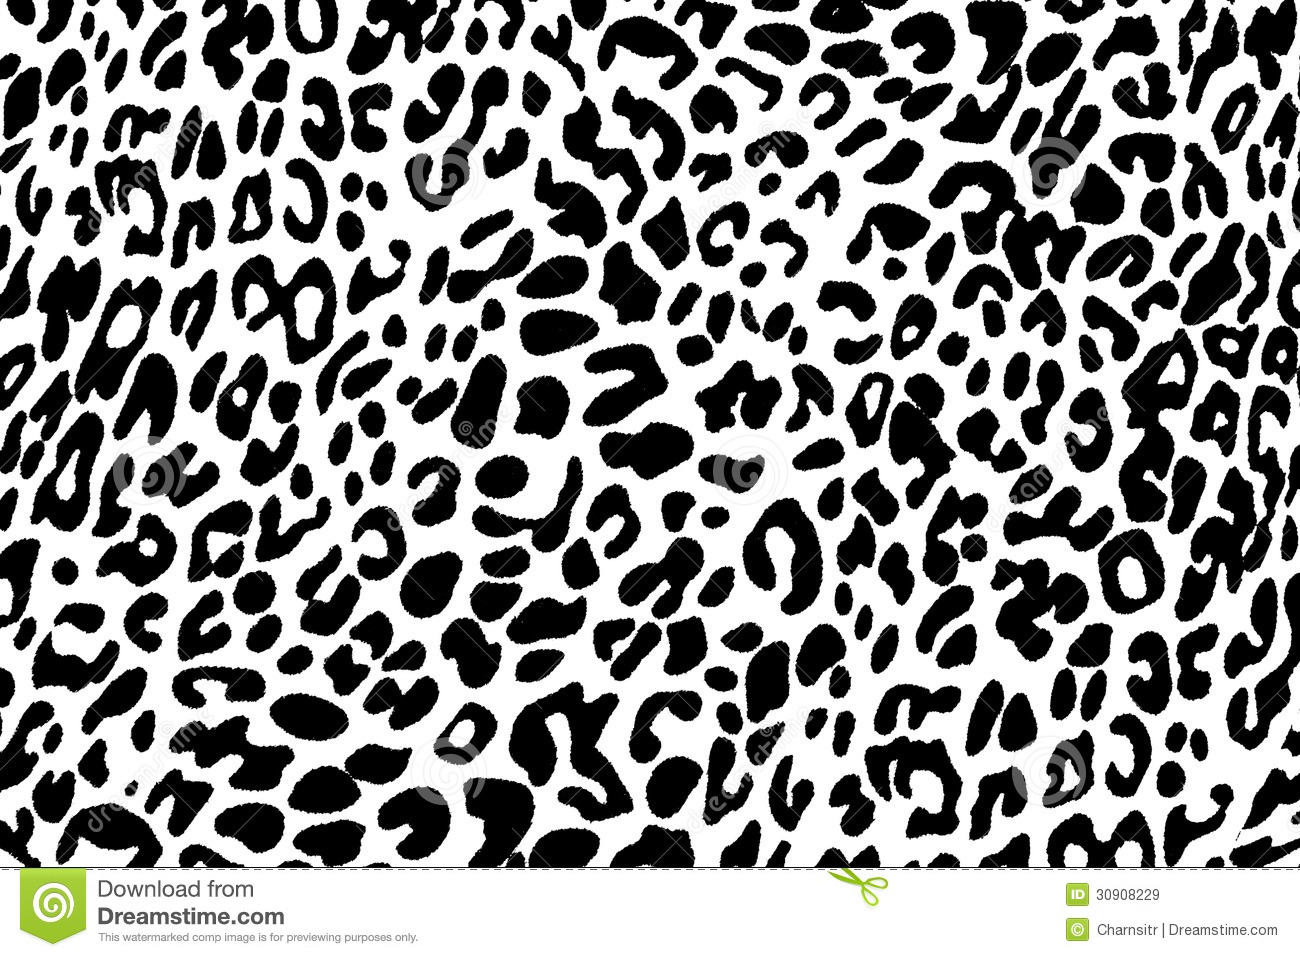 Leopard Print Black And White Cd design with animal print